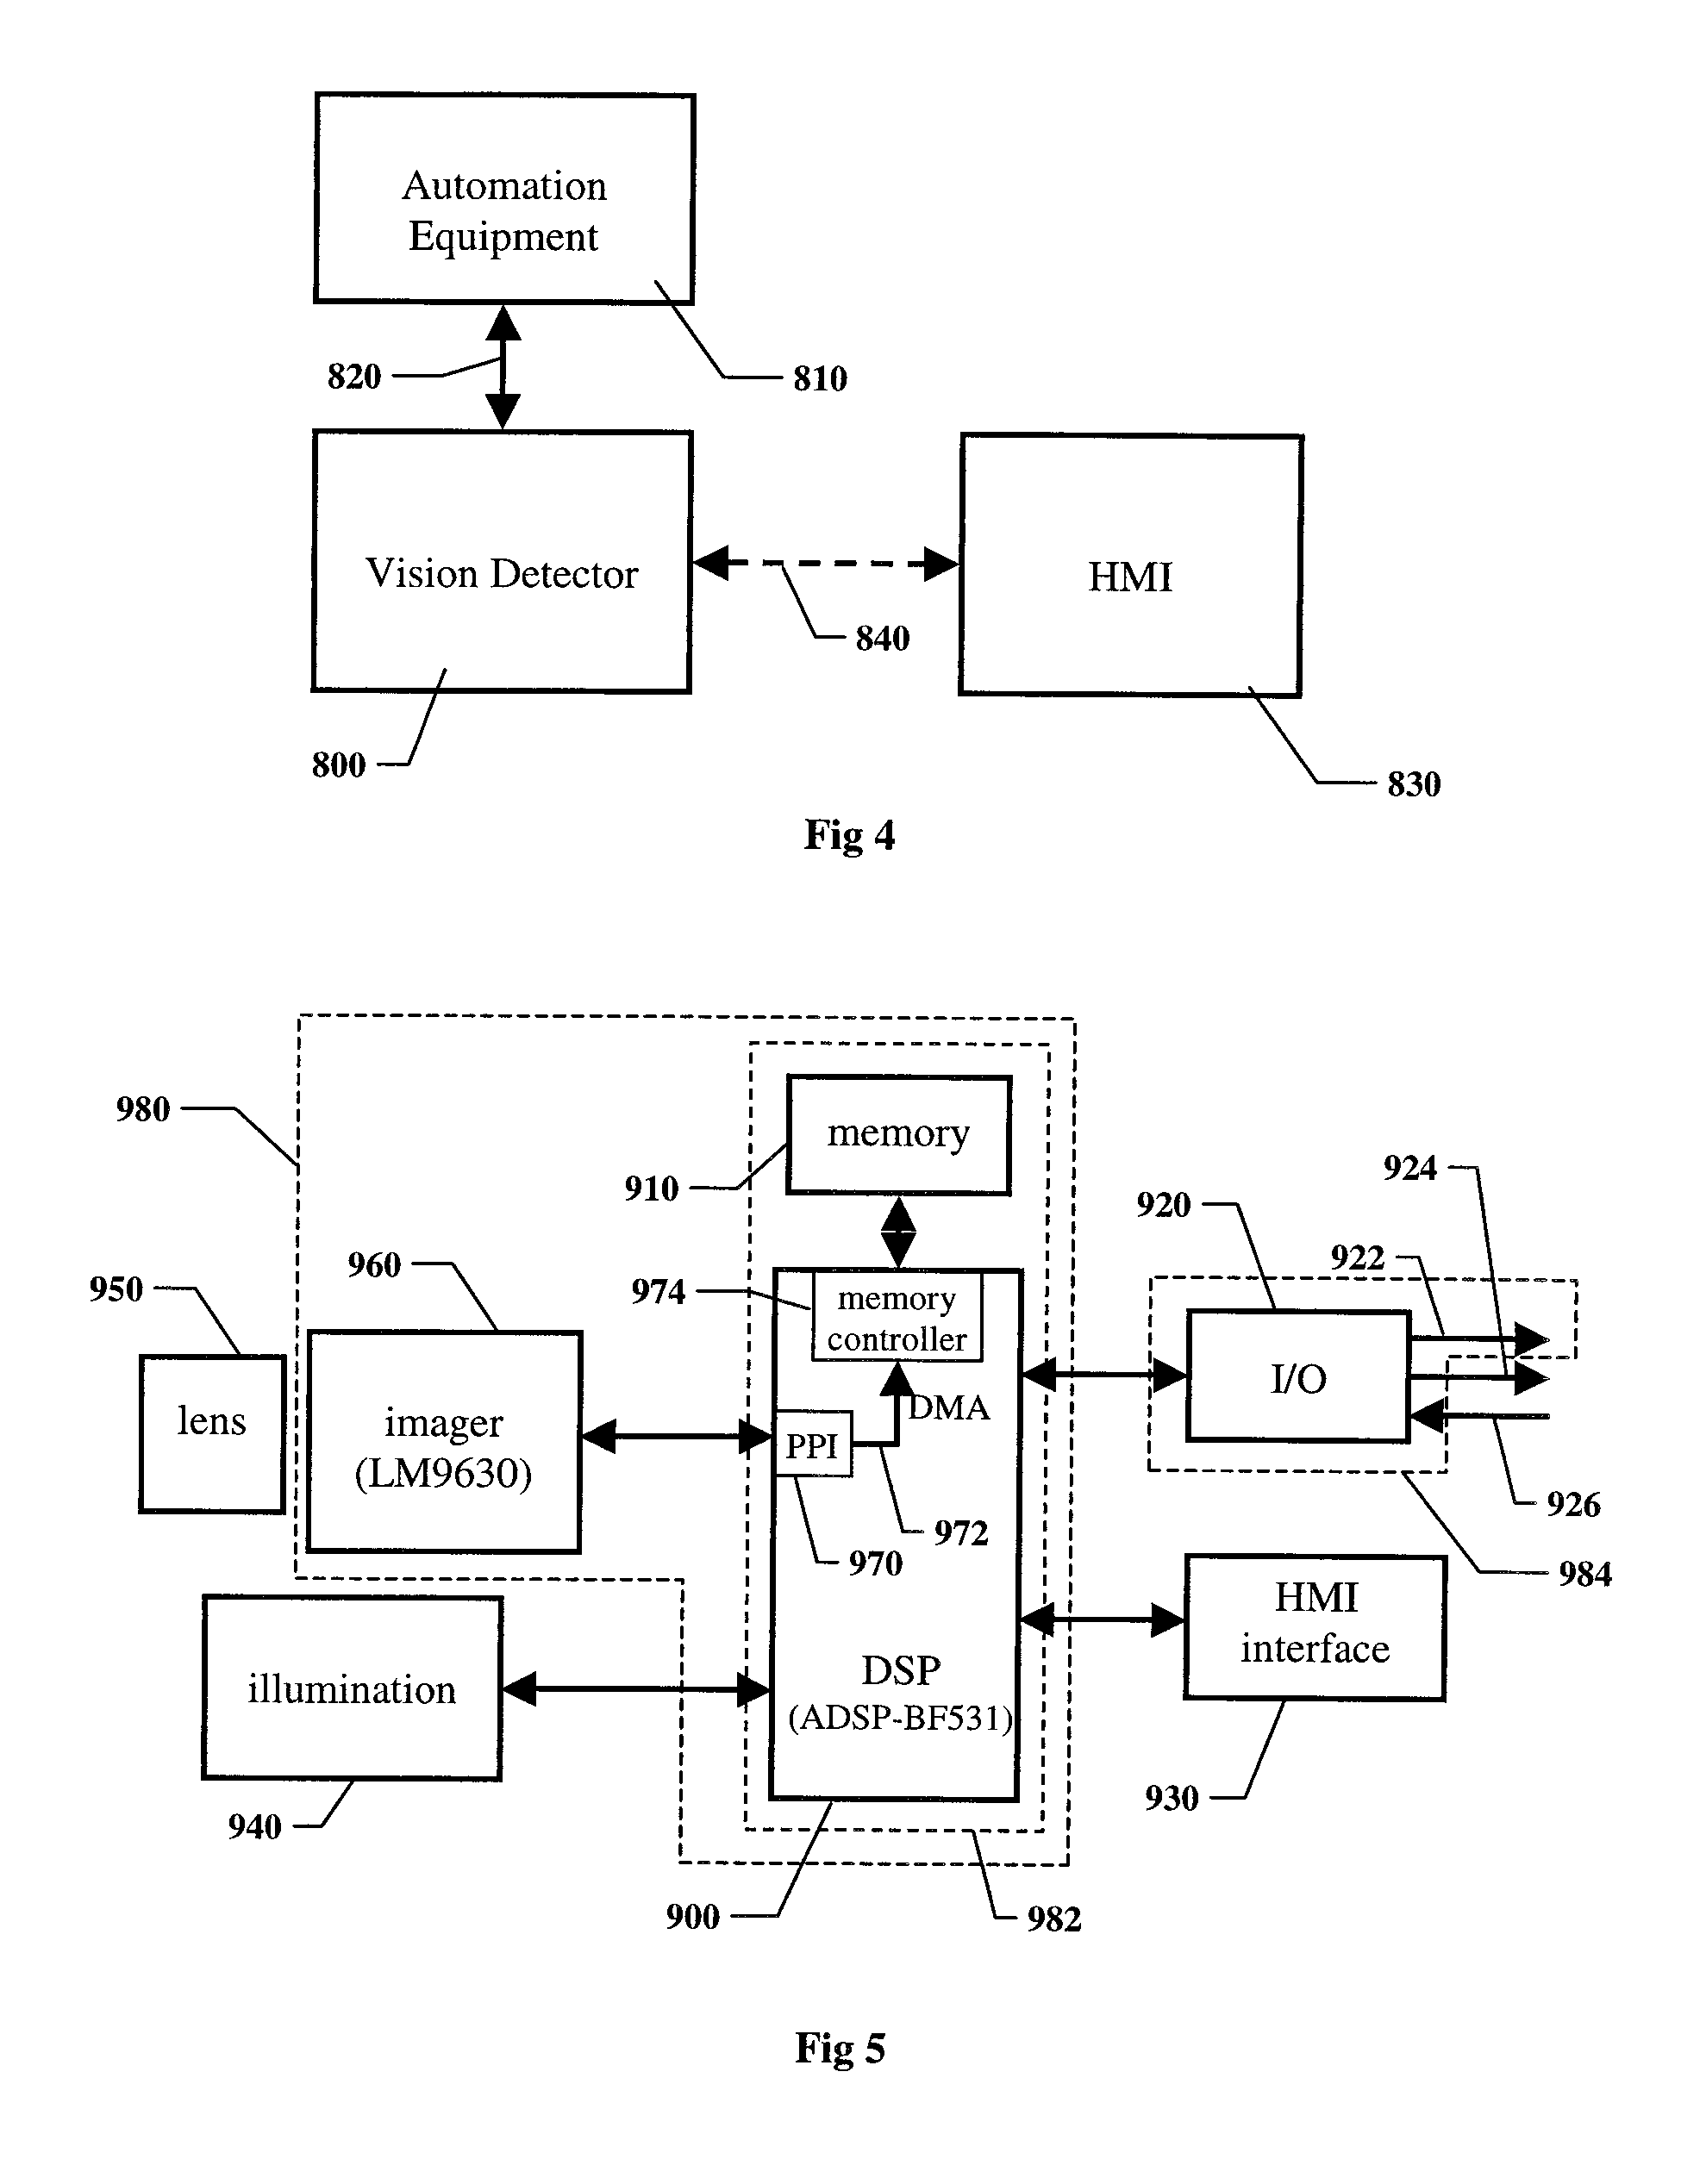 Method for setting parameters of a vision detector using production line information